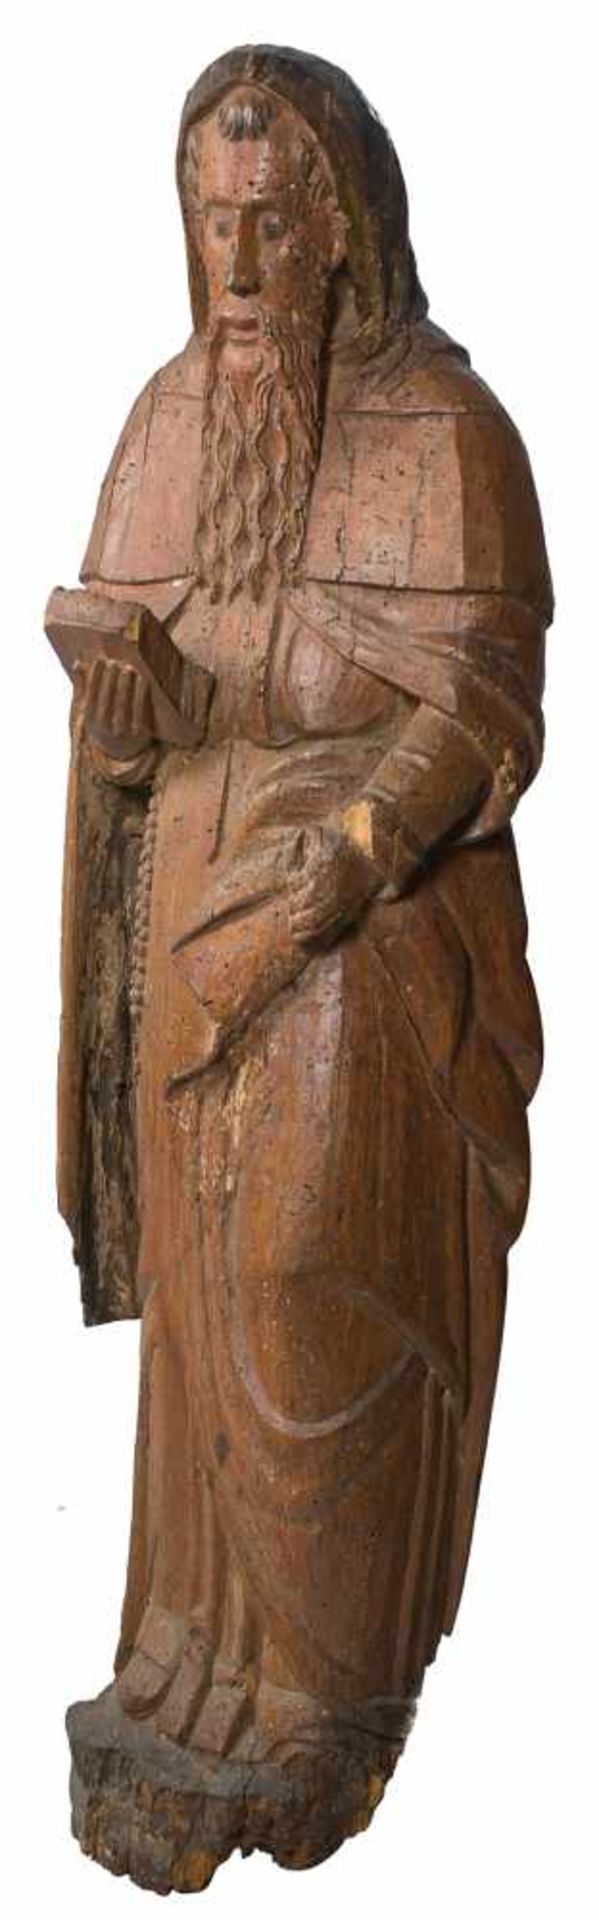 Saint Anthony Carved wooden sculpture. Early 16th century.Saint Anthony Carved wooden sculpture. - Bild 3 aus 5